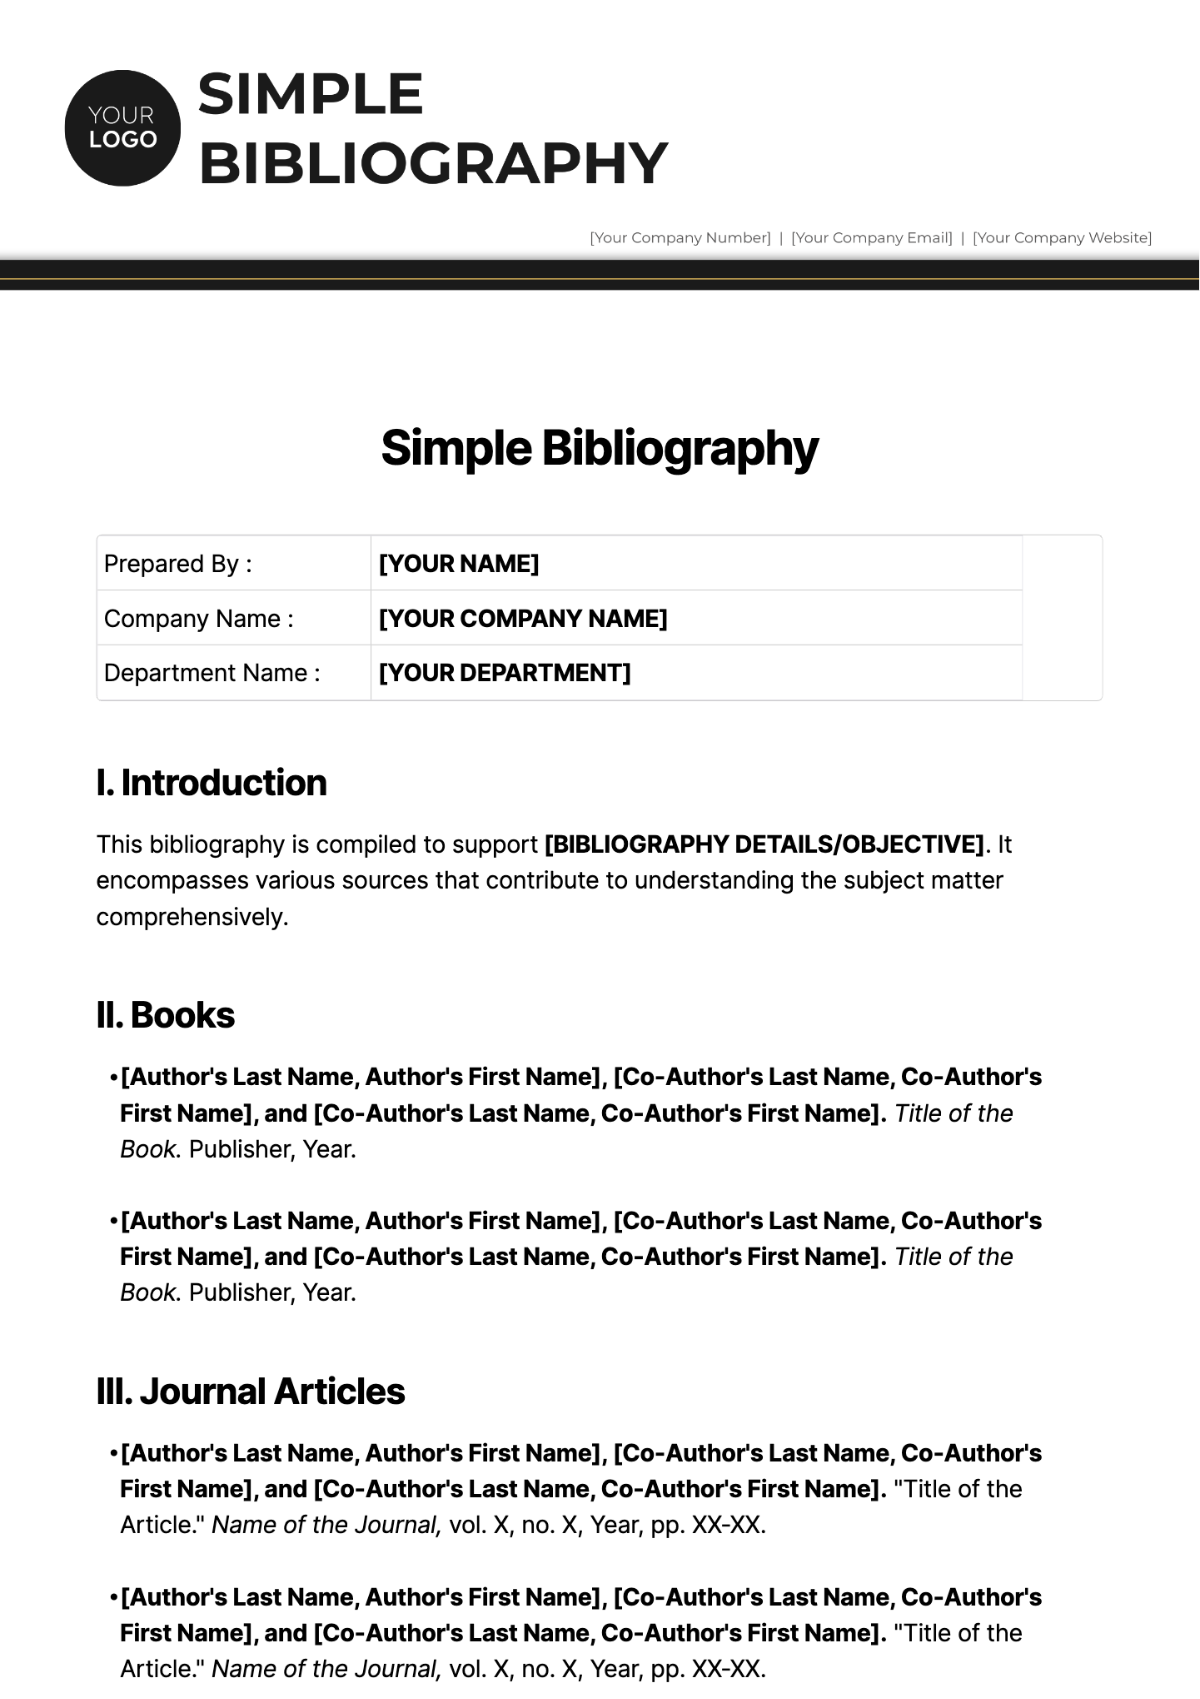 Simple Bibliography Template